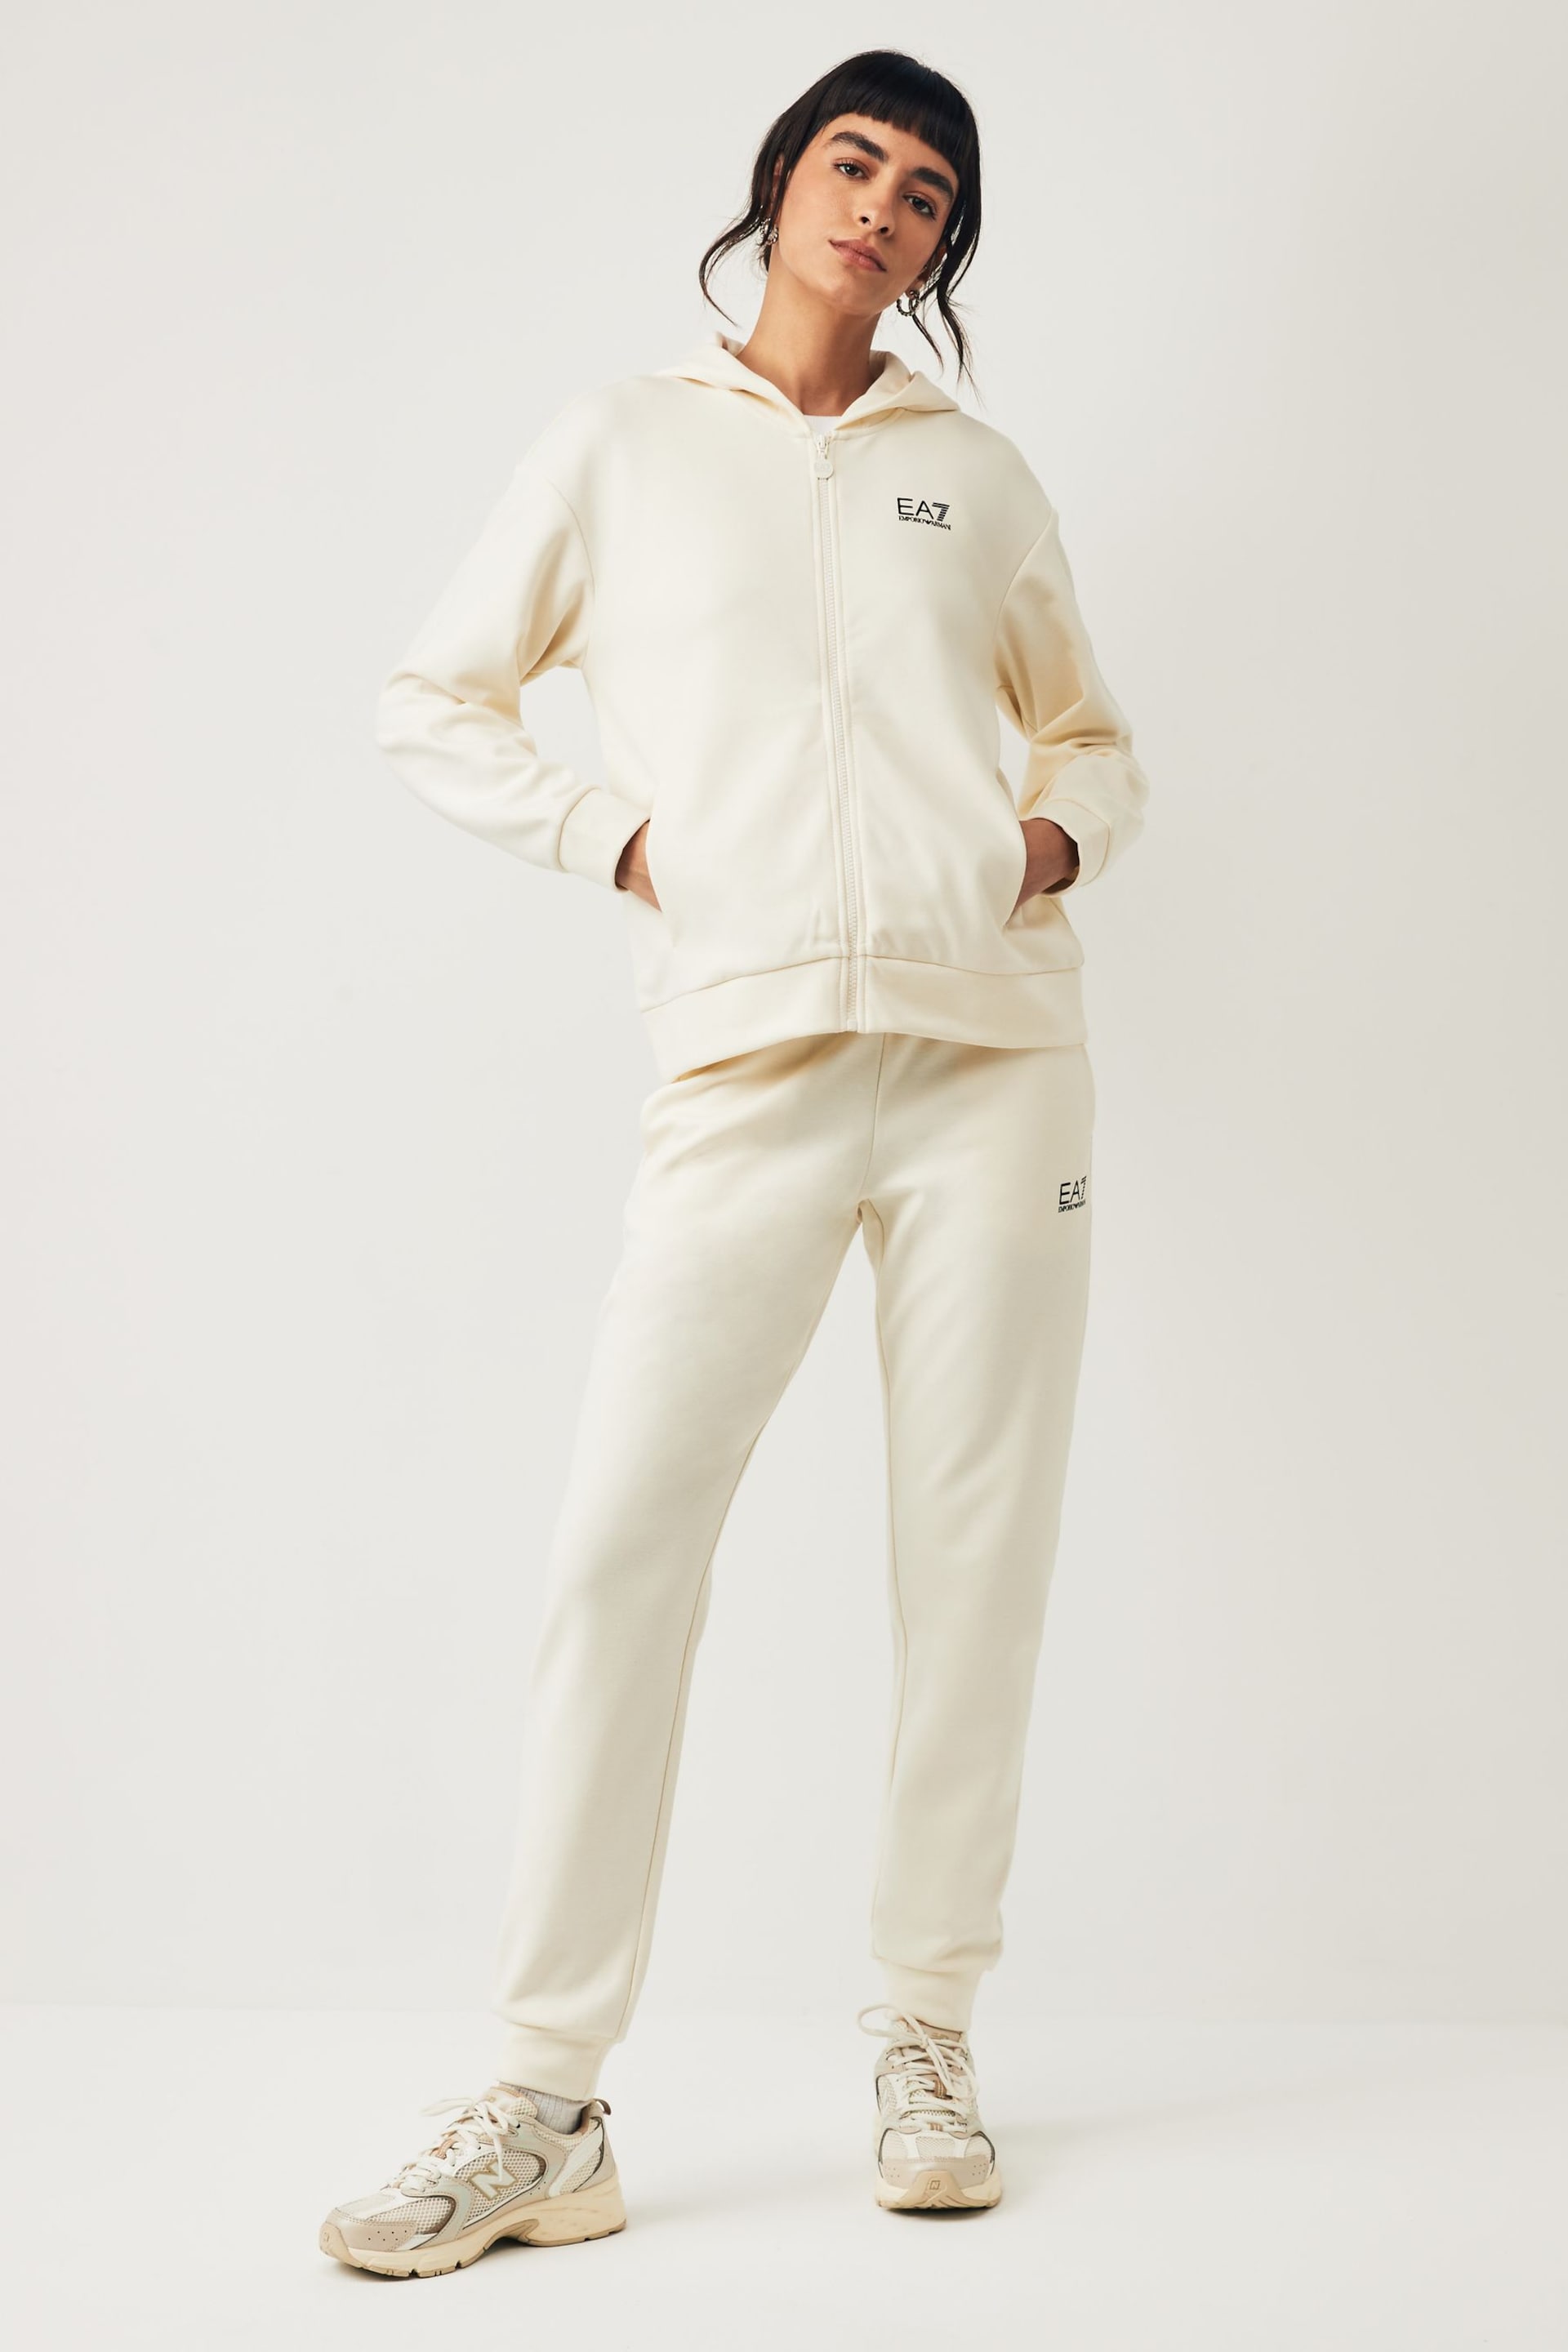 Emporio Armani EA7 Womens Zip Through Hooded Tracksuit - Image 1 of 2